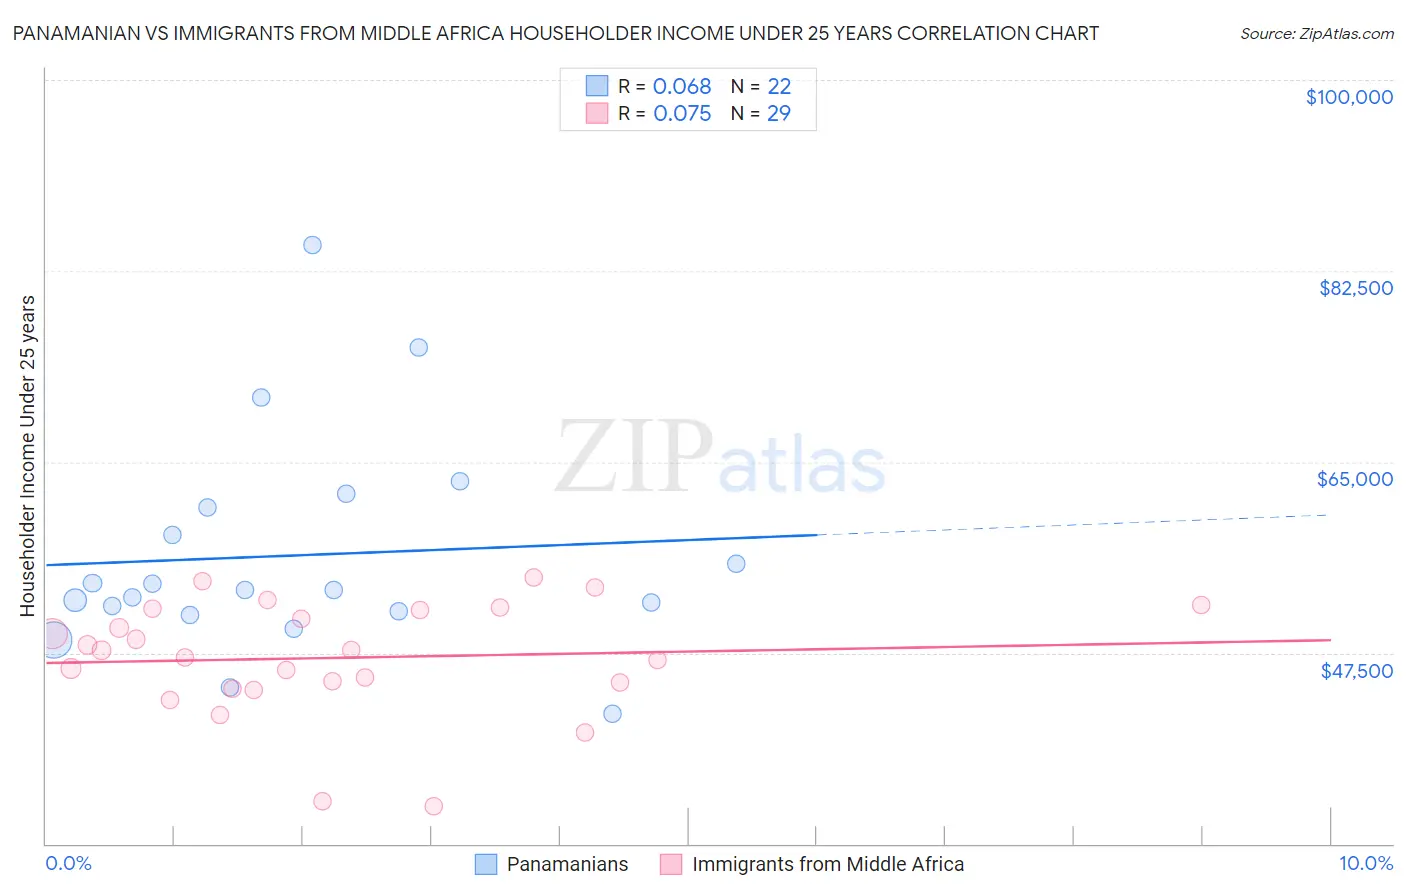 Panamanian vs Immigrants from Middle Africa Householder Income Under 25 years